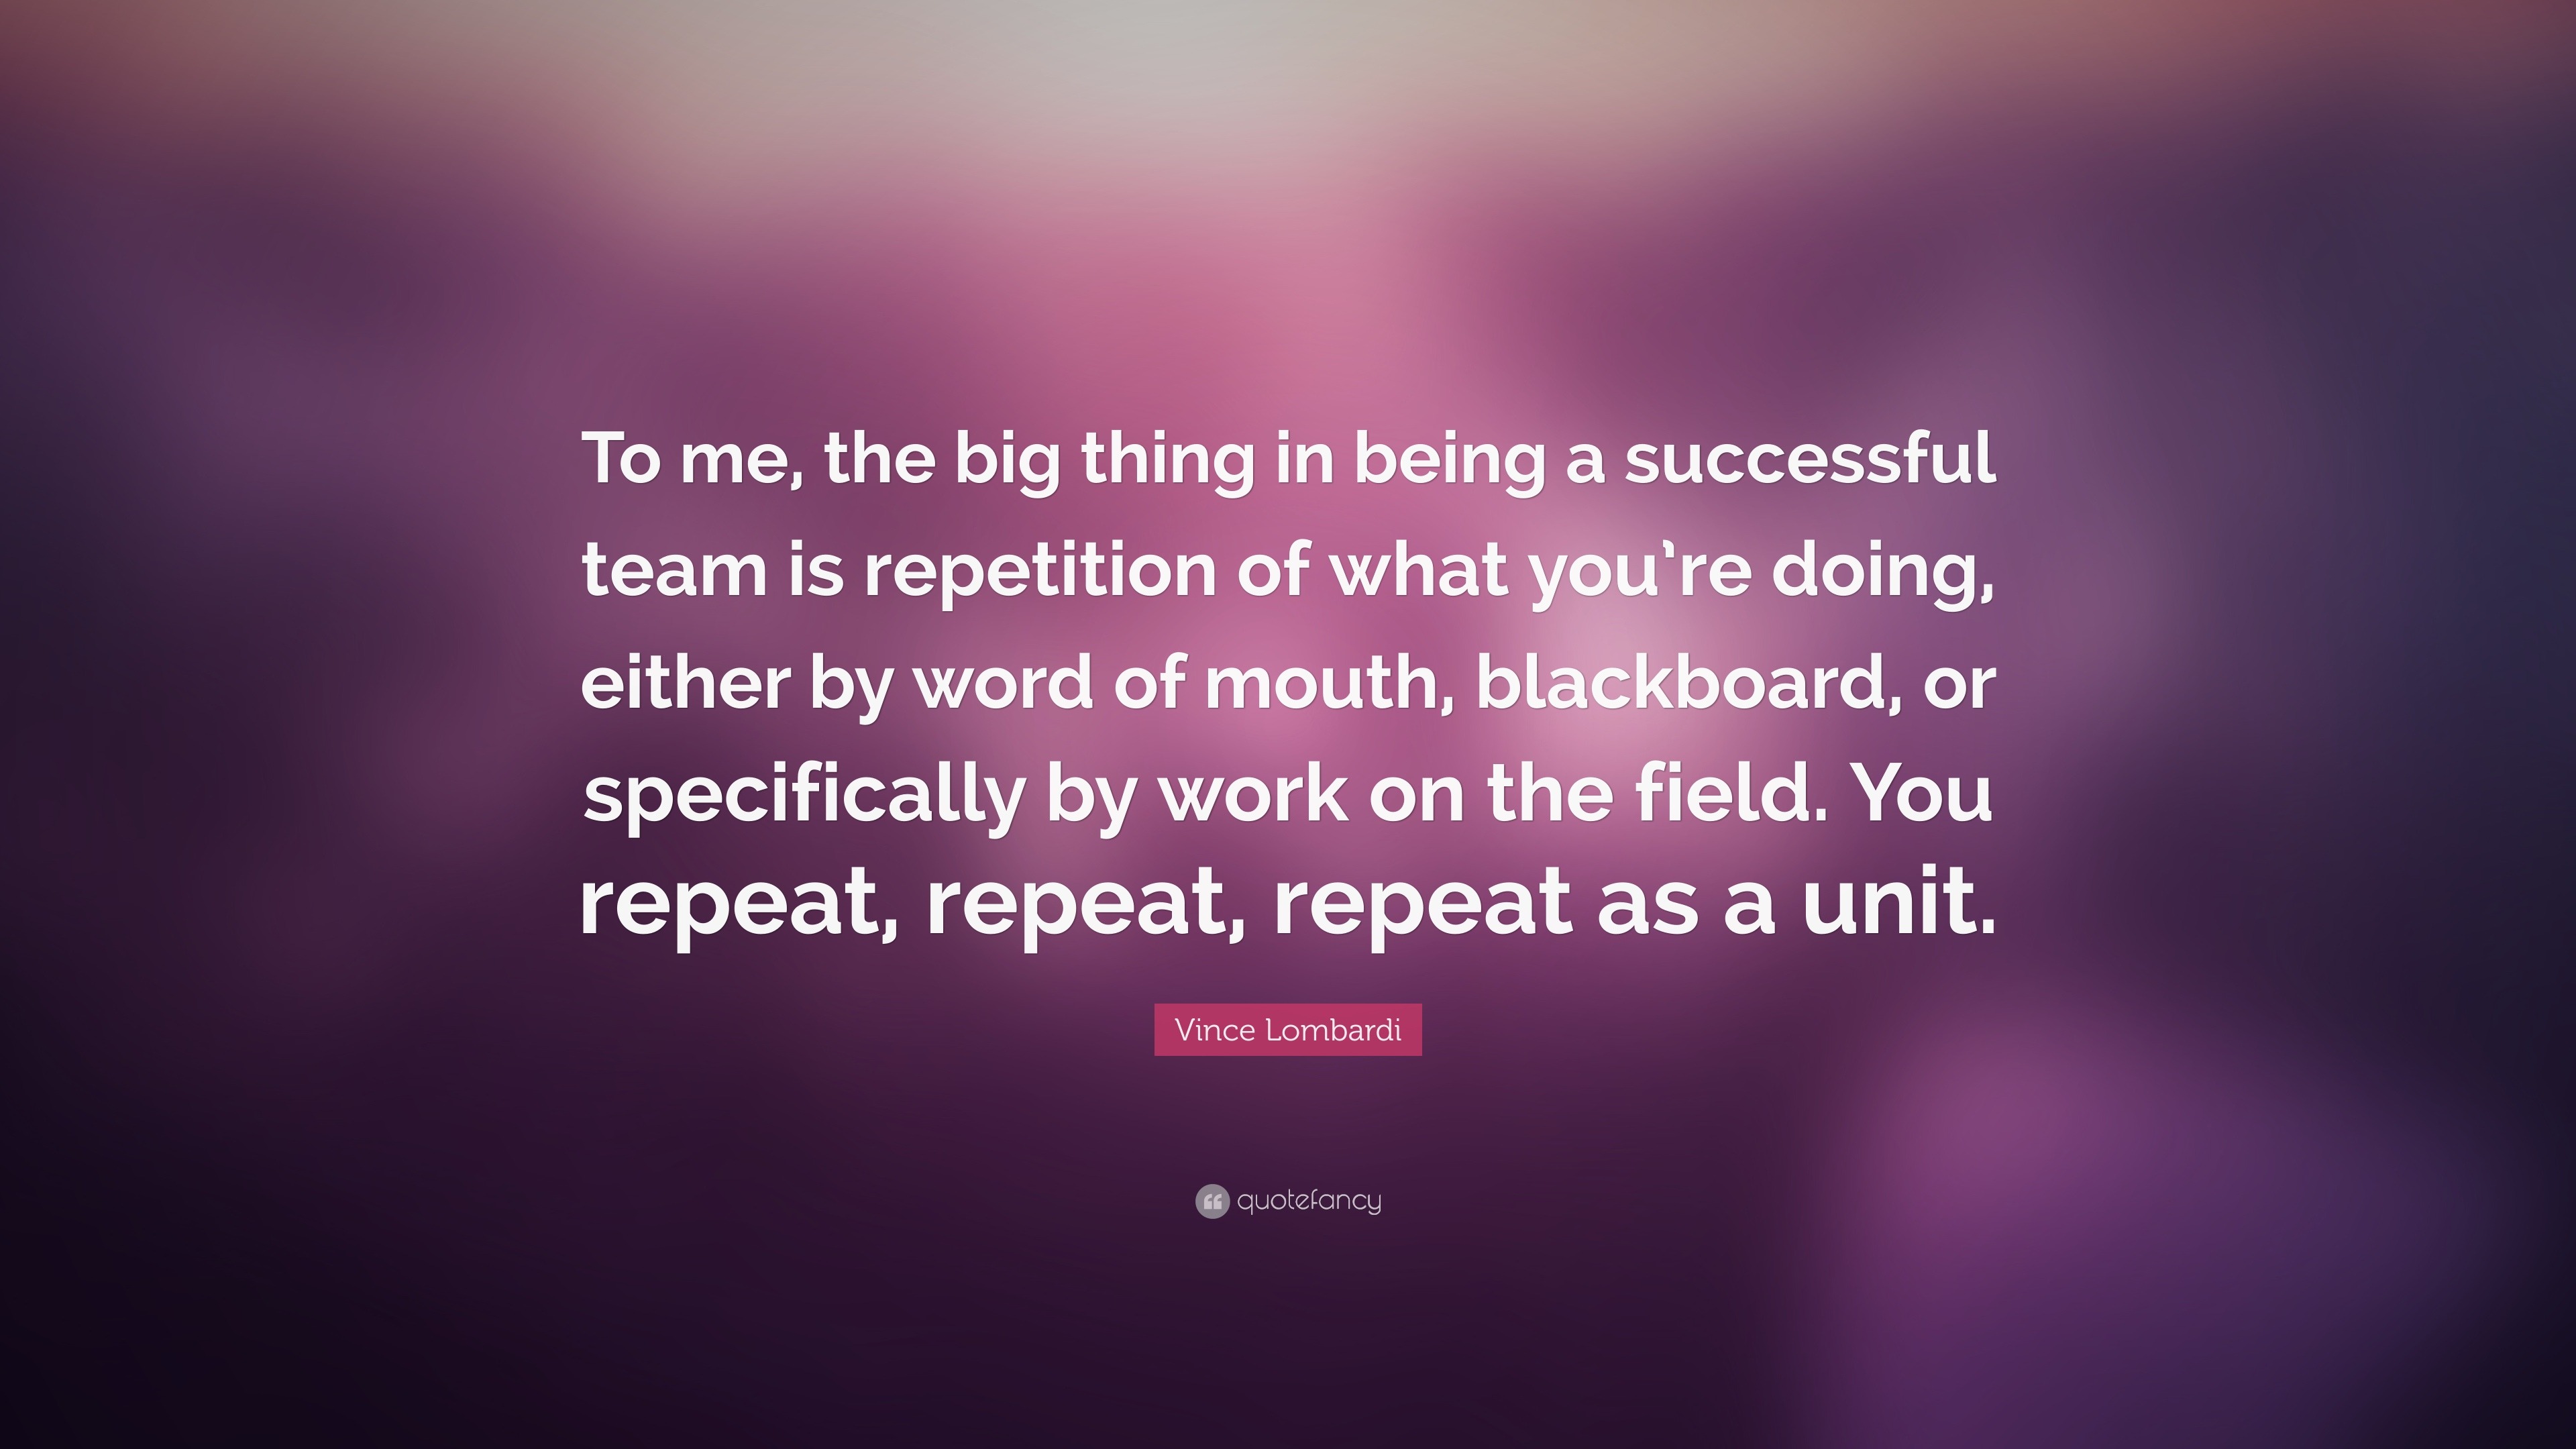 Vince Lombardi Quote: “To me, the big thing in being a successful team ...